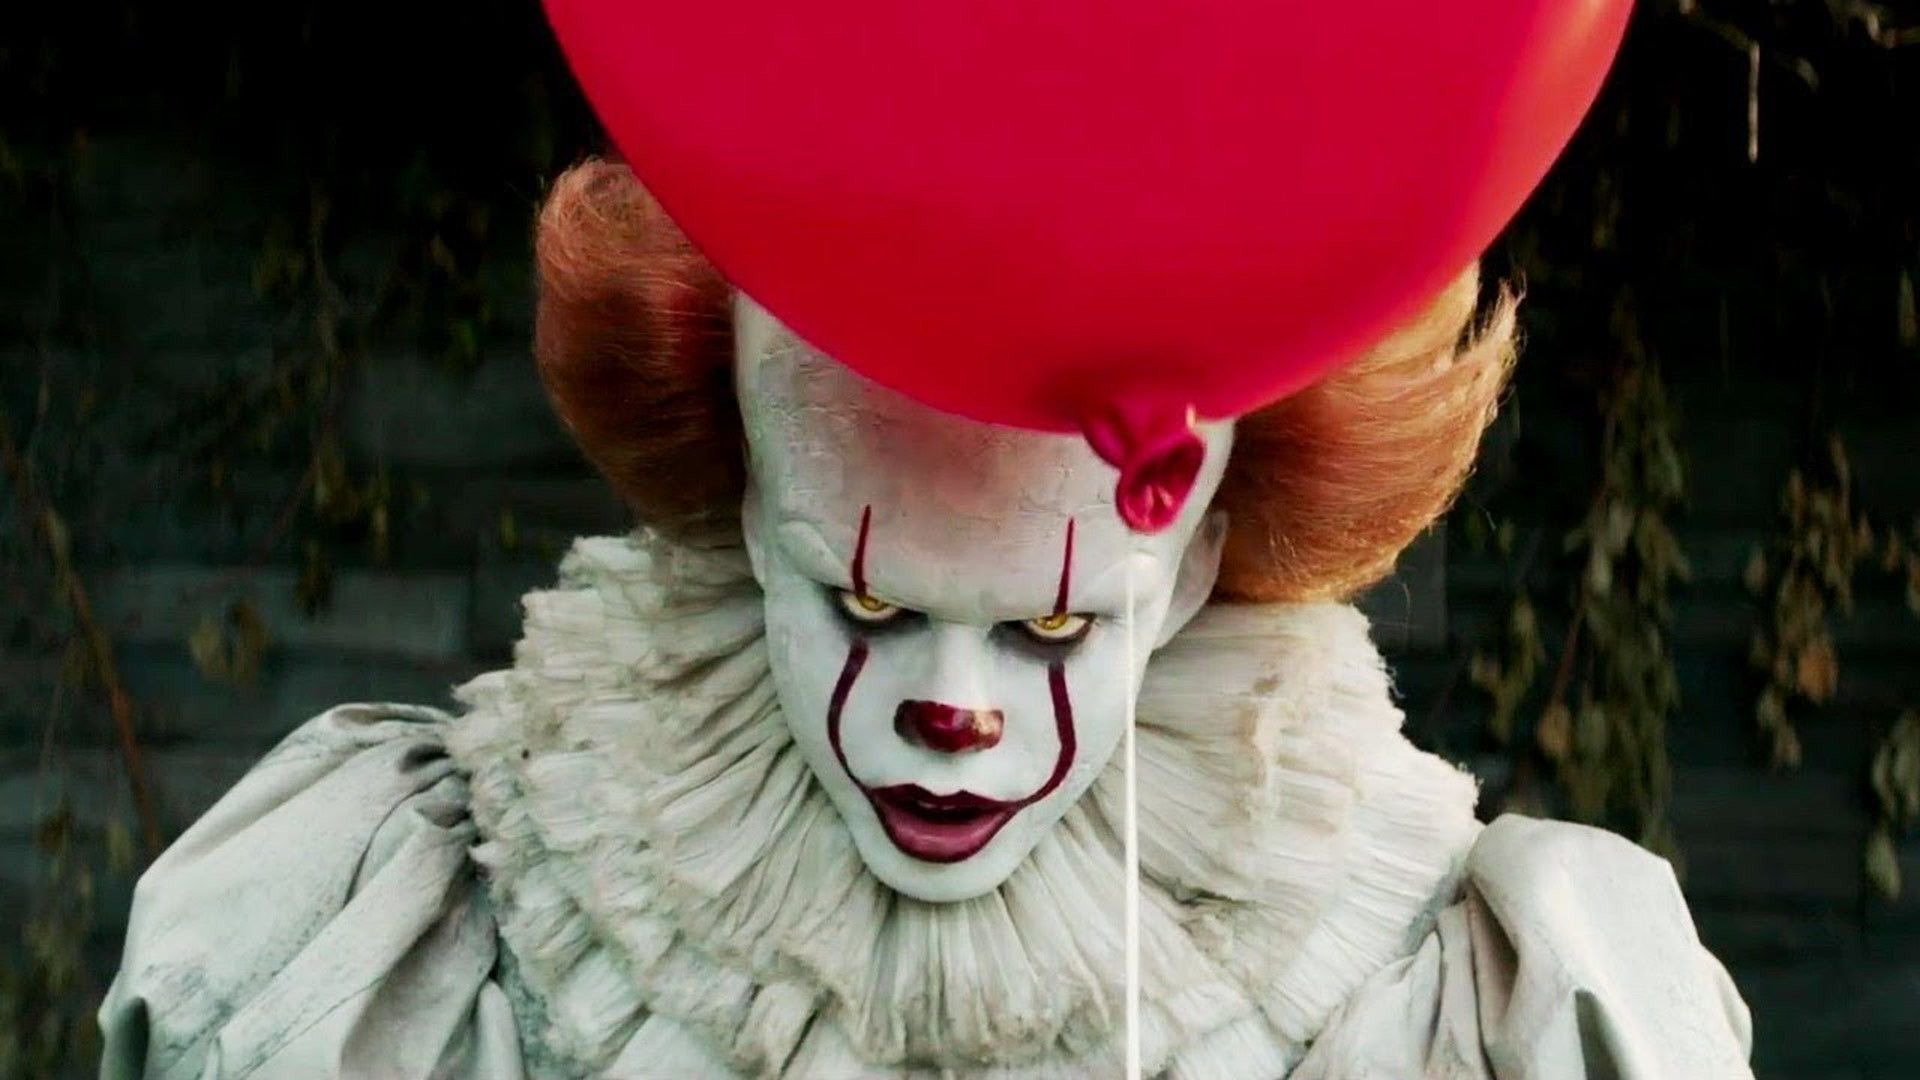 The Barrett Brief - Pennywise takes on Box Office, CVS takes on Guns